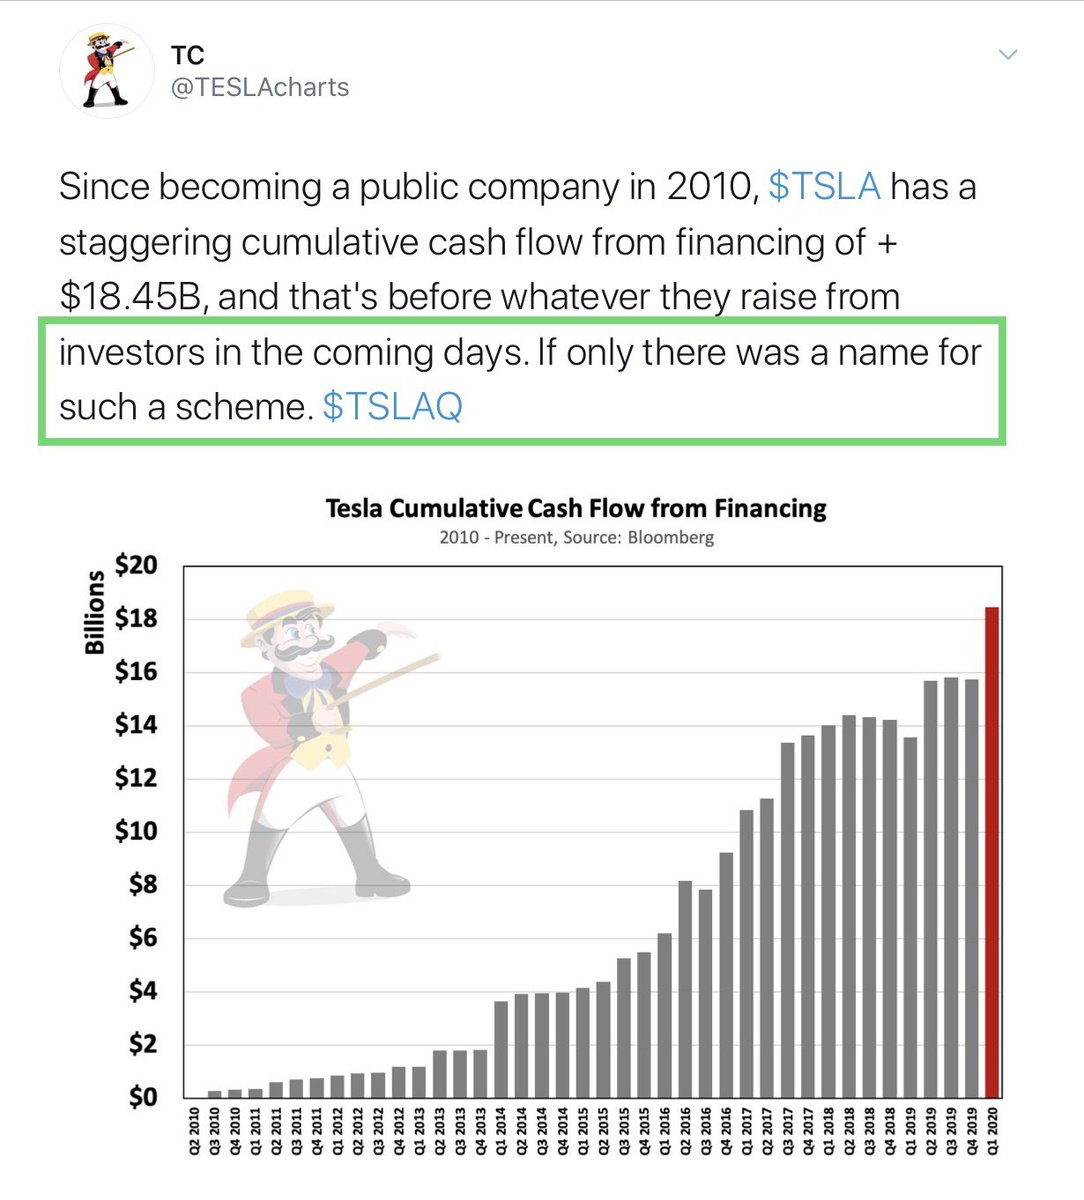 13.  @TESLACharts begs ignorance of such things- which is surprising as he claims to be a Financial Analyst14. But this is what is normally referred to as “Capitalism”